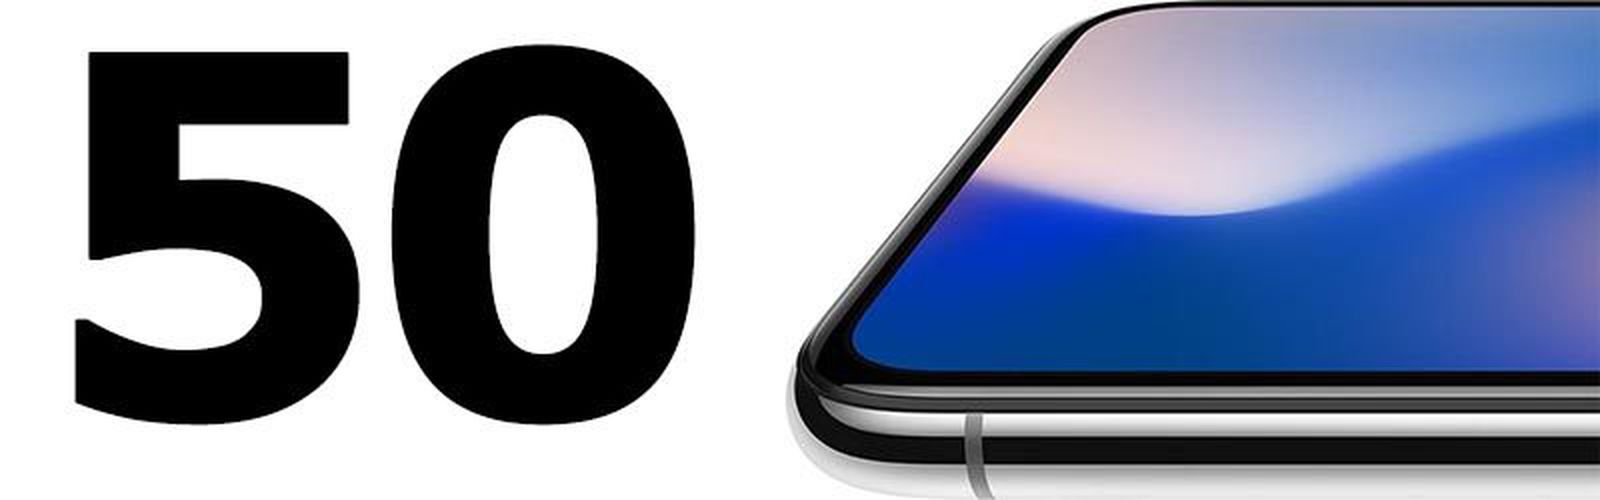 Apple iPhone '10' 2017: 10 Rumors and Features